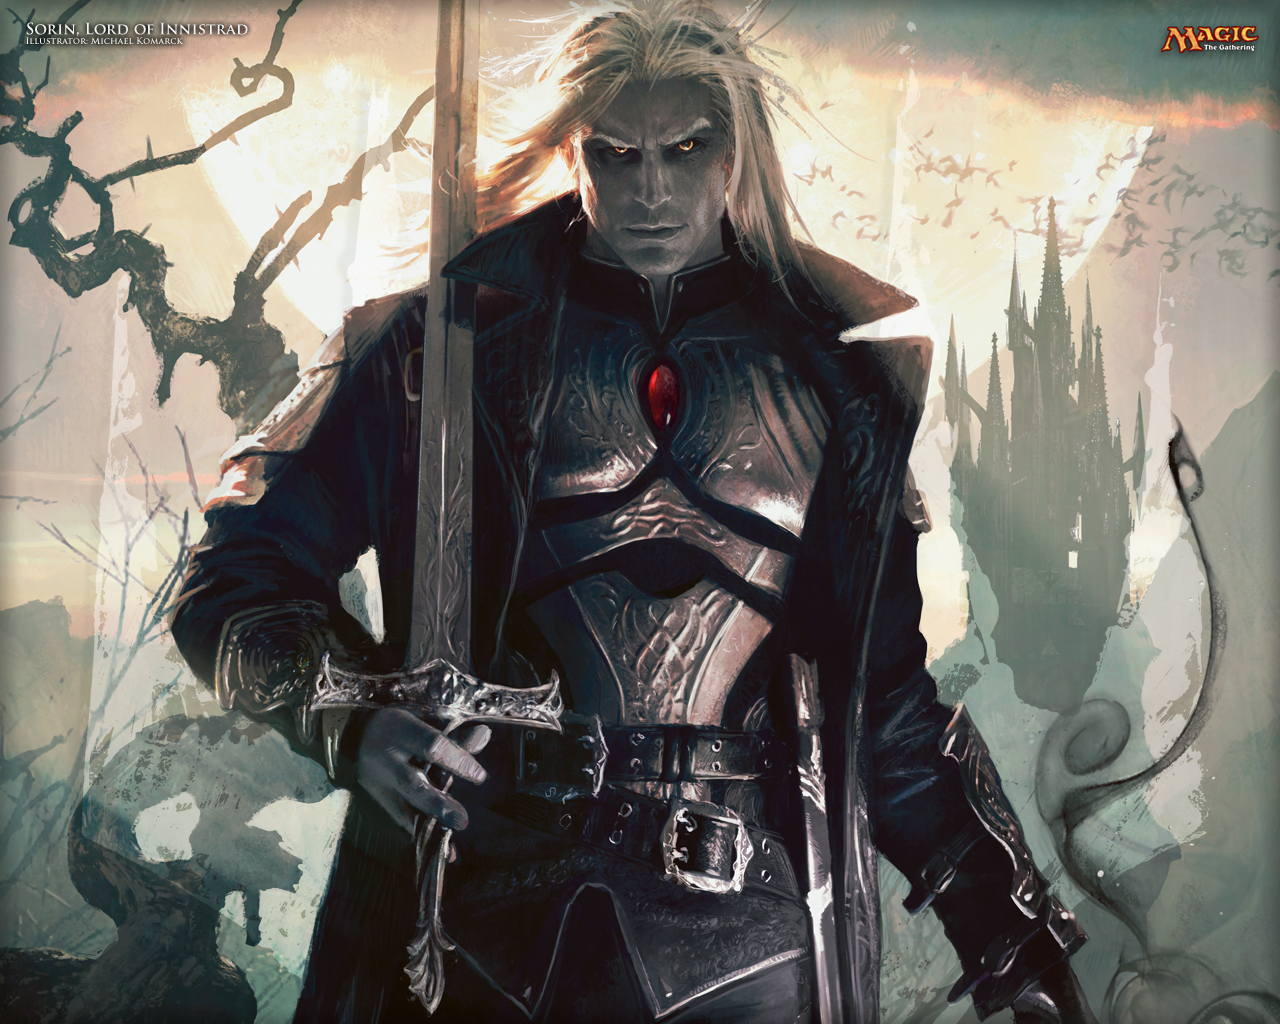 Sorin, Lord of Innistrad MtG Art from Dark Ascension Set by Michael Komarck of Magic: the Gathering